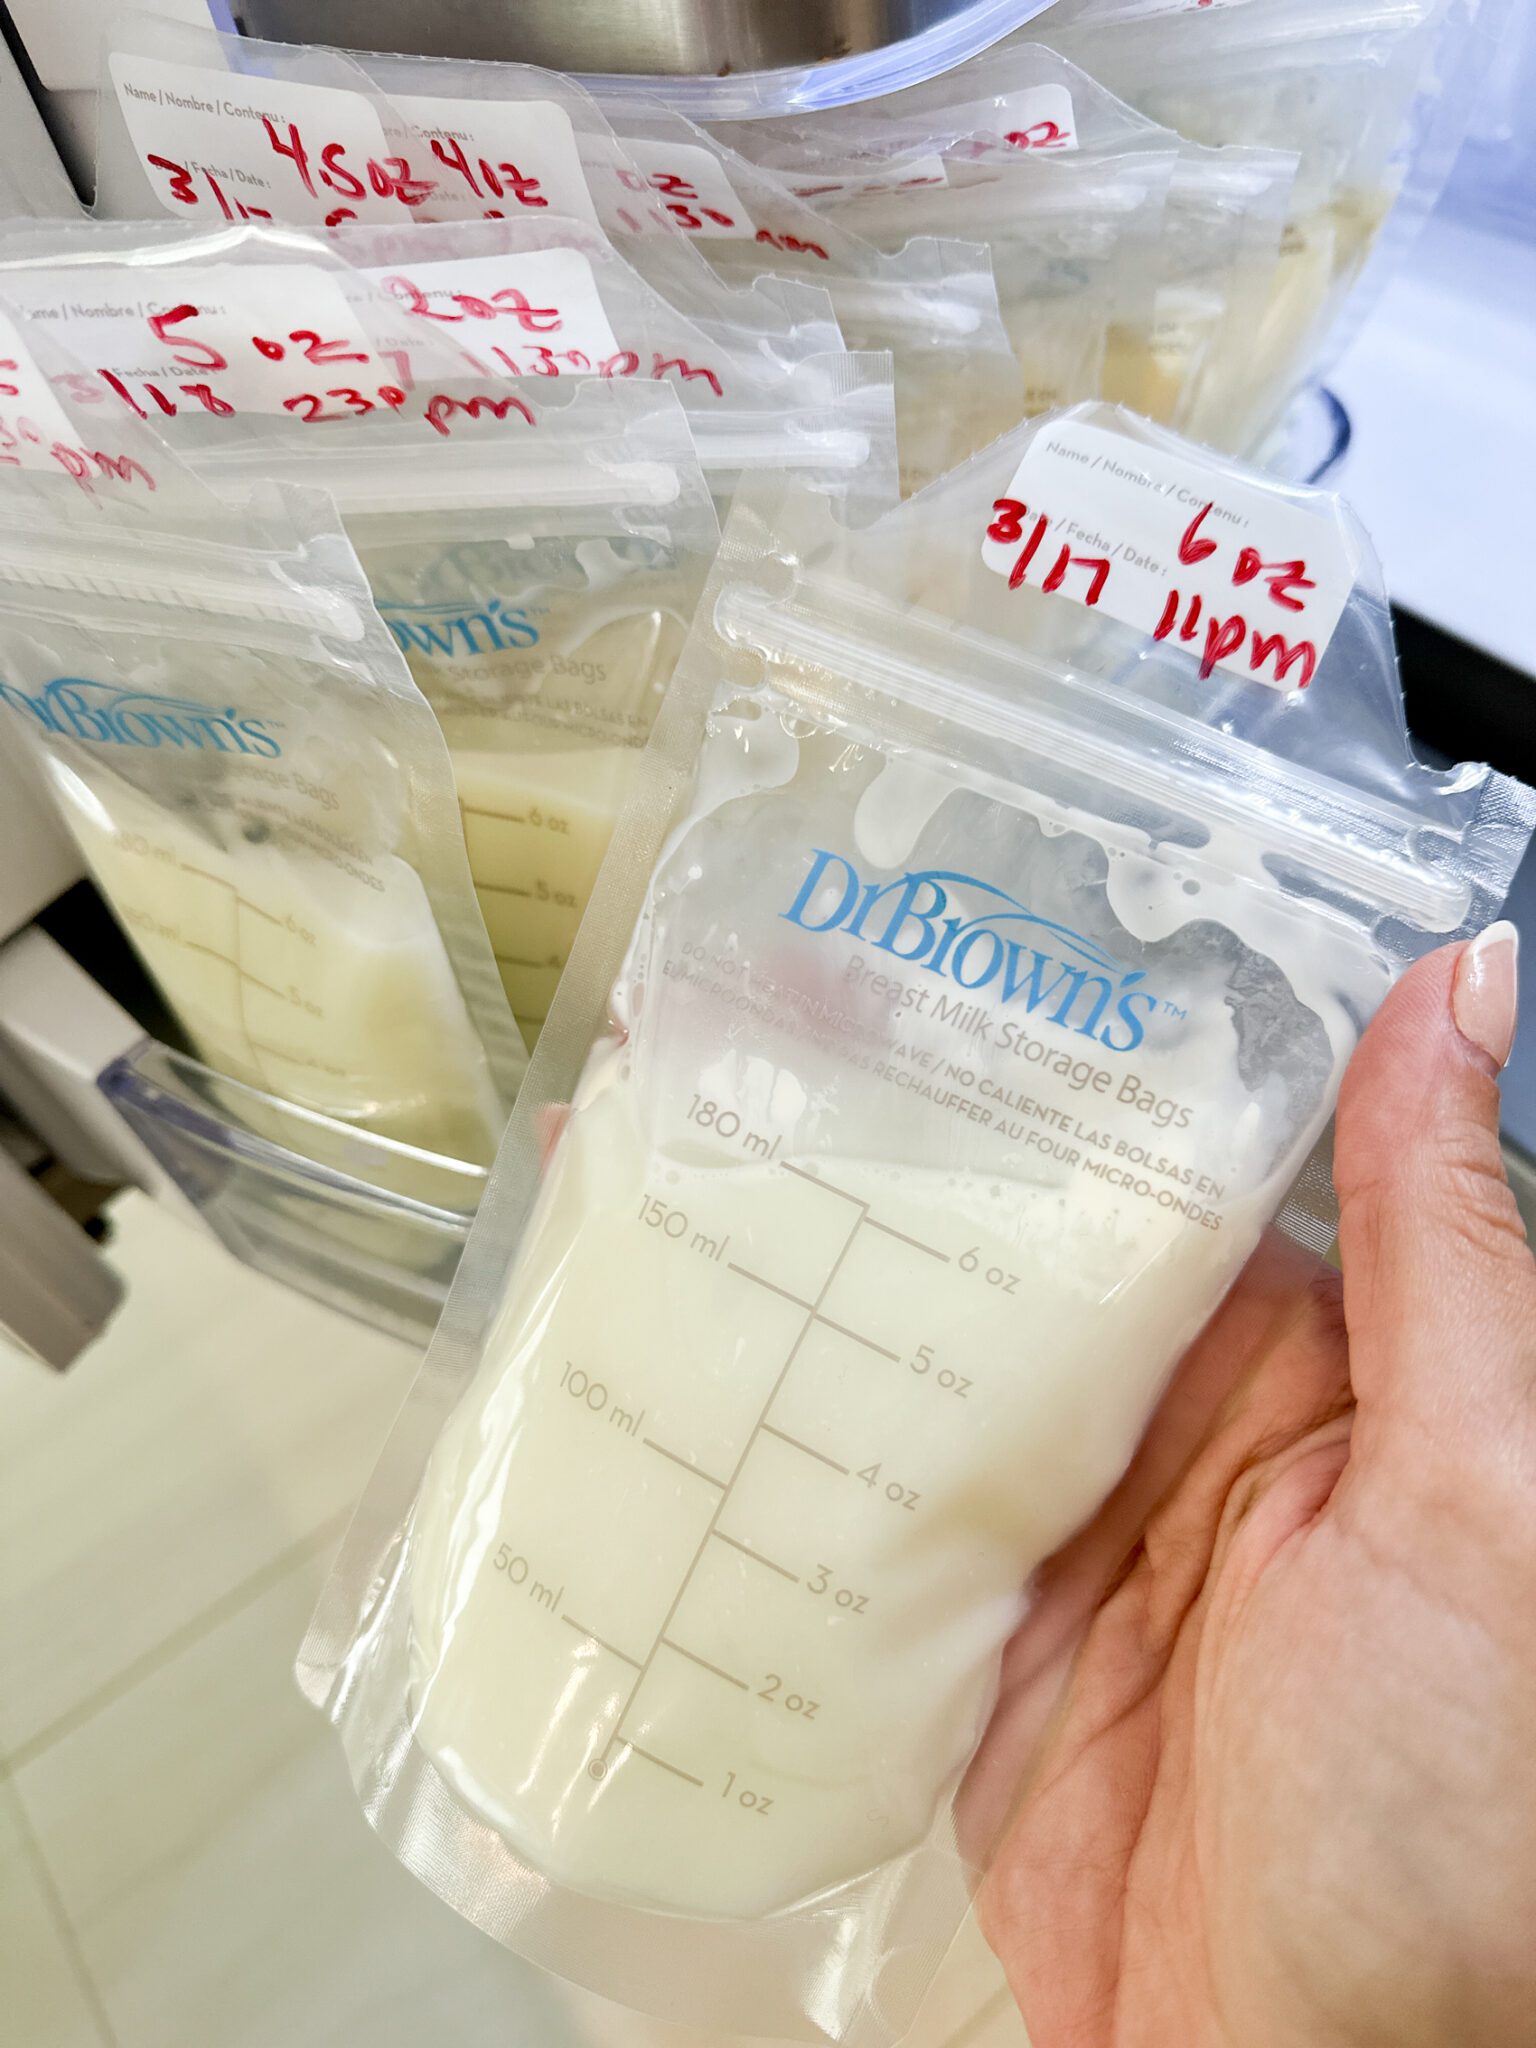 https://www.aglamlifestyle.com/wp-content/uploads/2023/04/momcozy-s12-pro-review-dr-browns-breast-milk-bags-aglamlifestyle-scaled.jpg